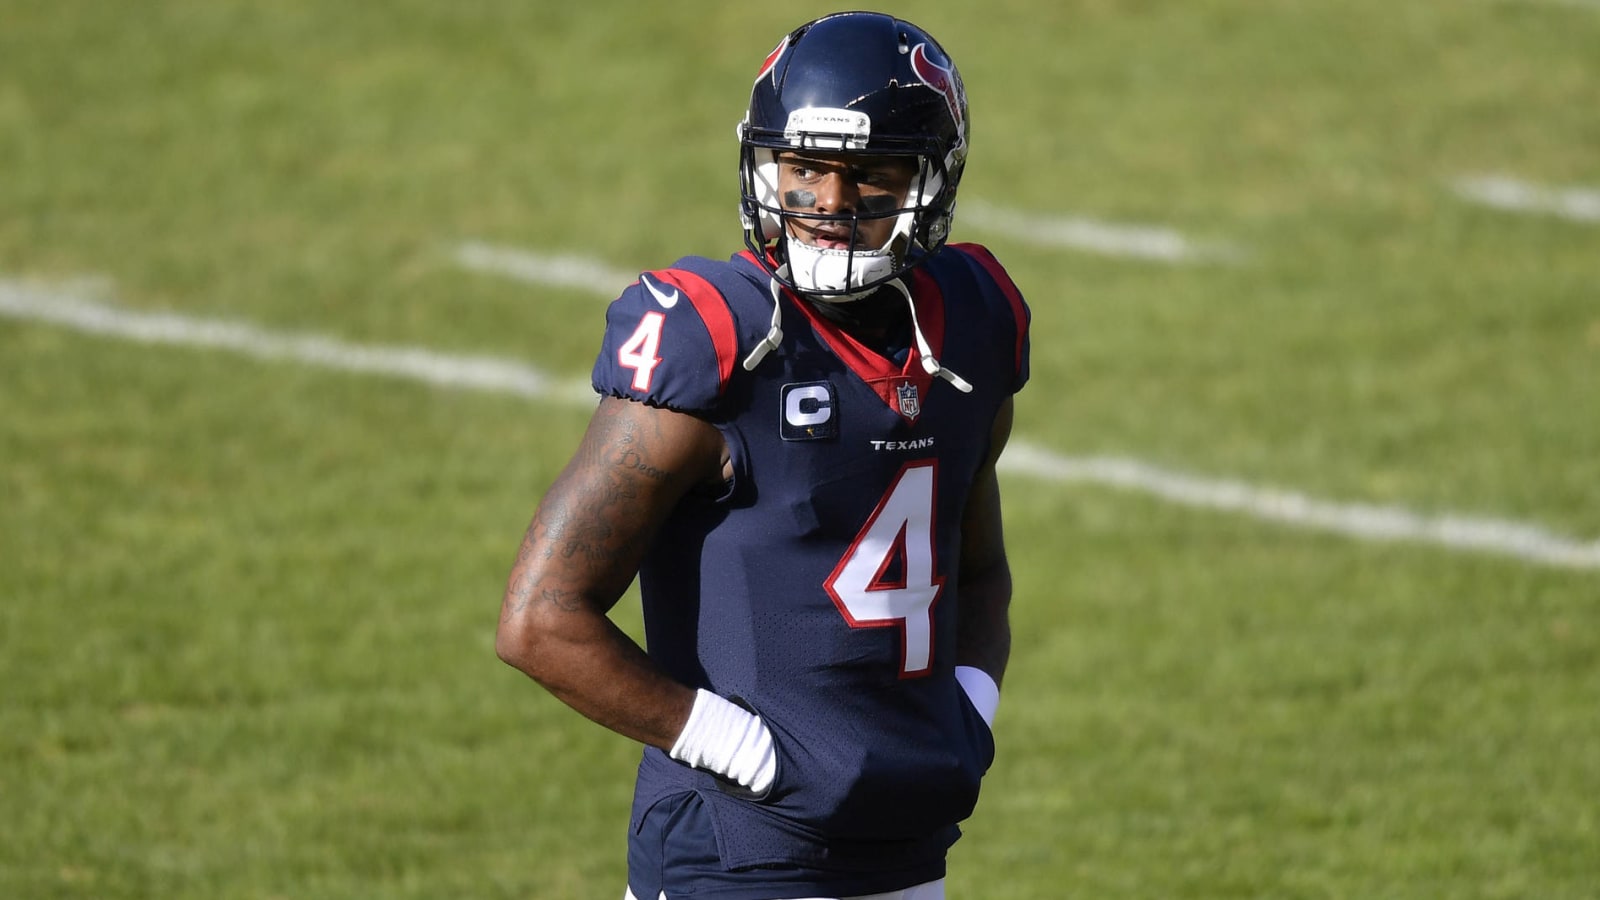 David Culley: Texans are 'committed' to Deshaun Watson